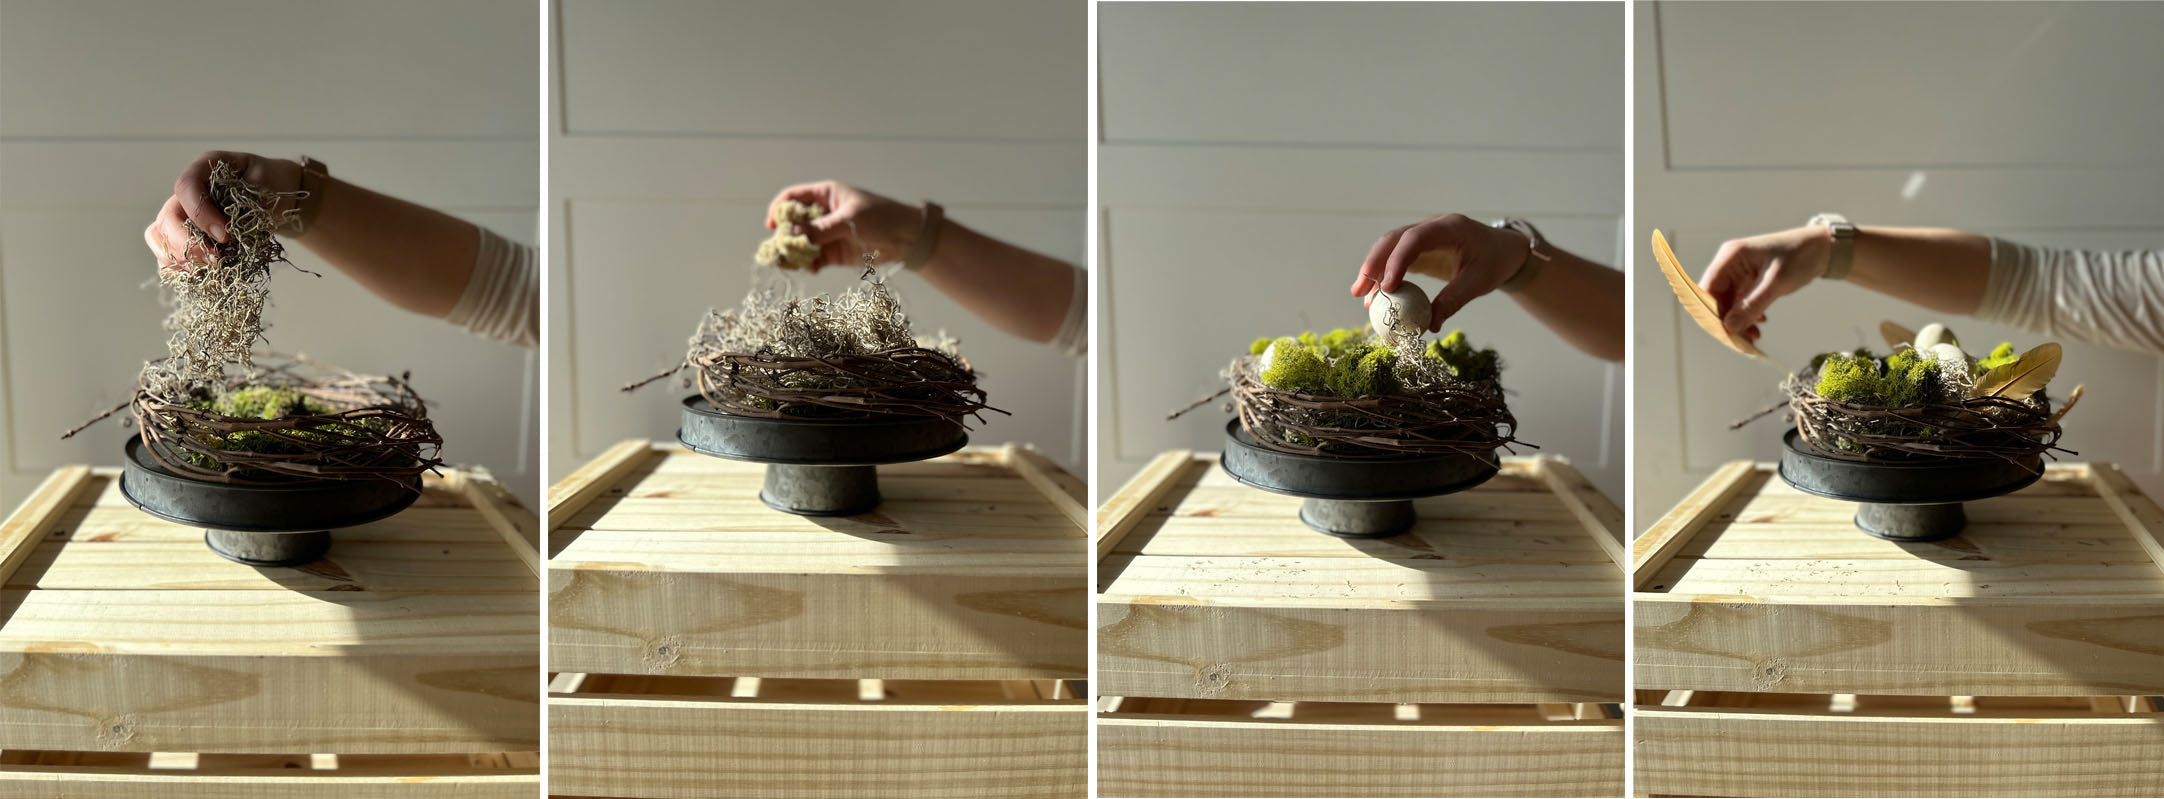 steps for creating a decorative spring riser, birds nest display with ceramic eggs and feathers